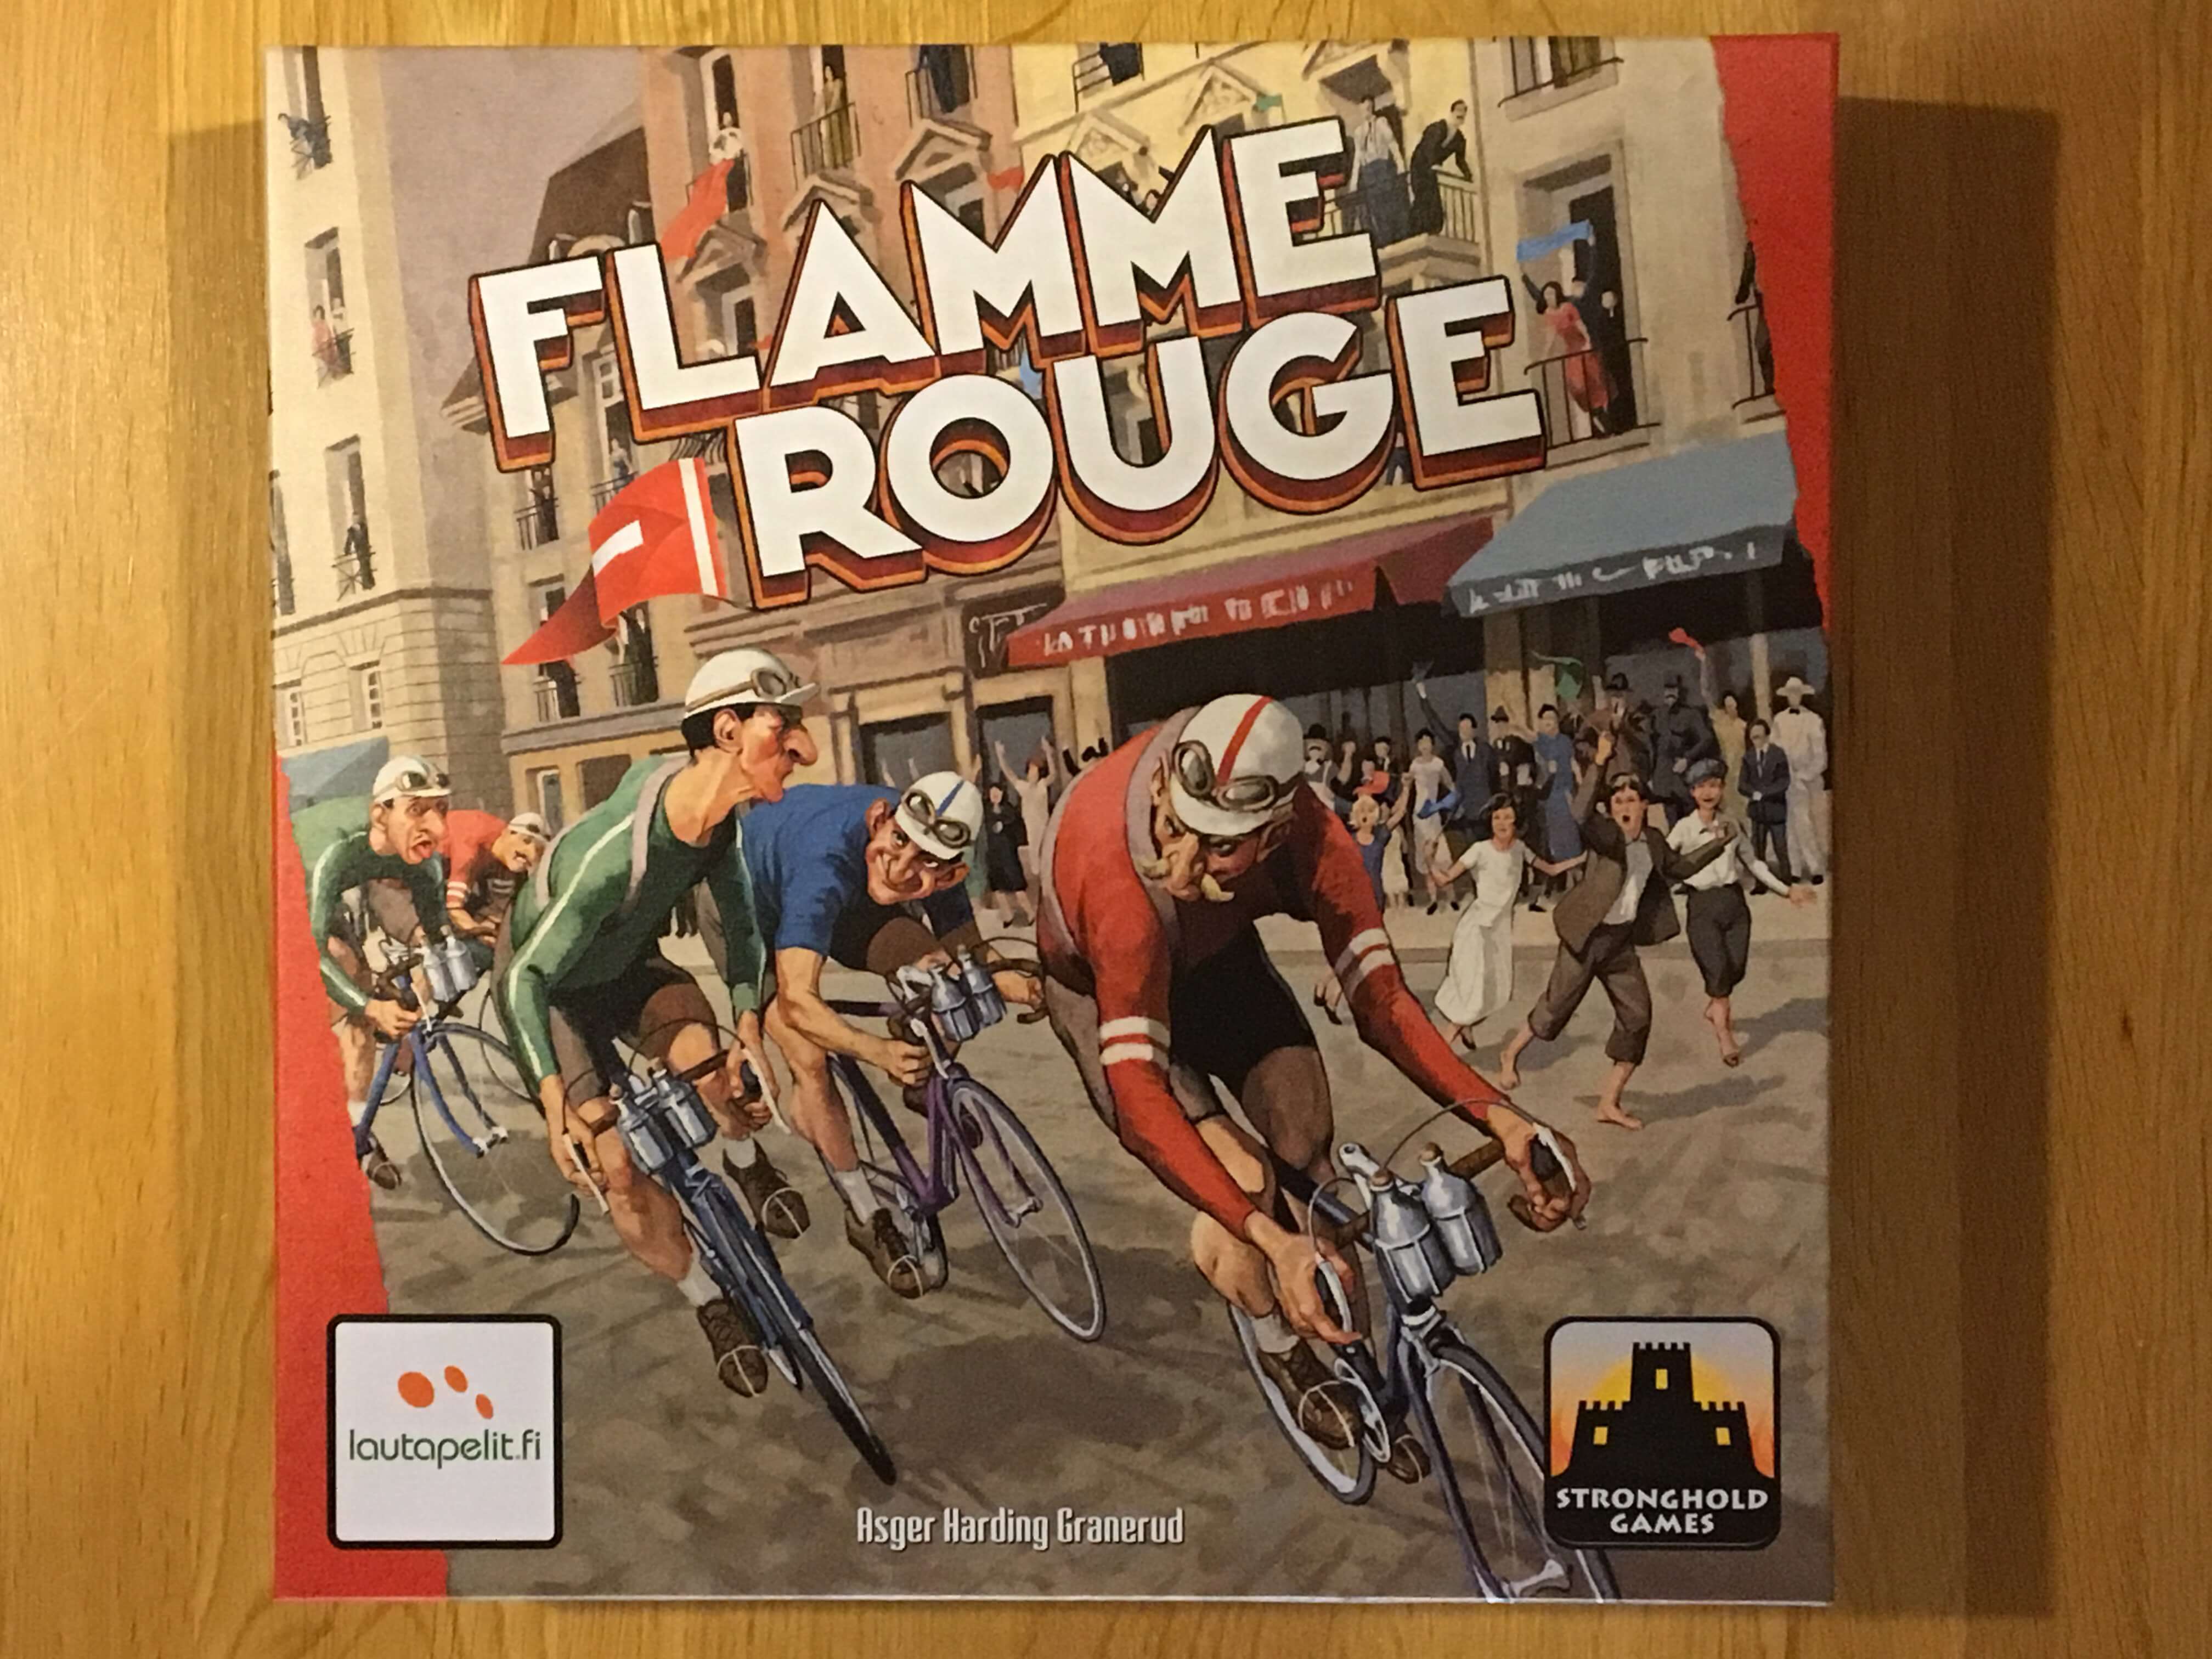 Flamme Rouge Featured